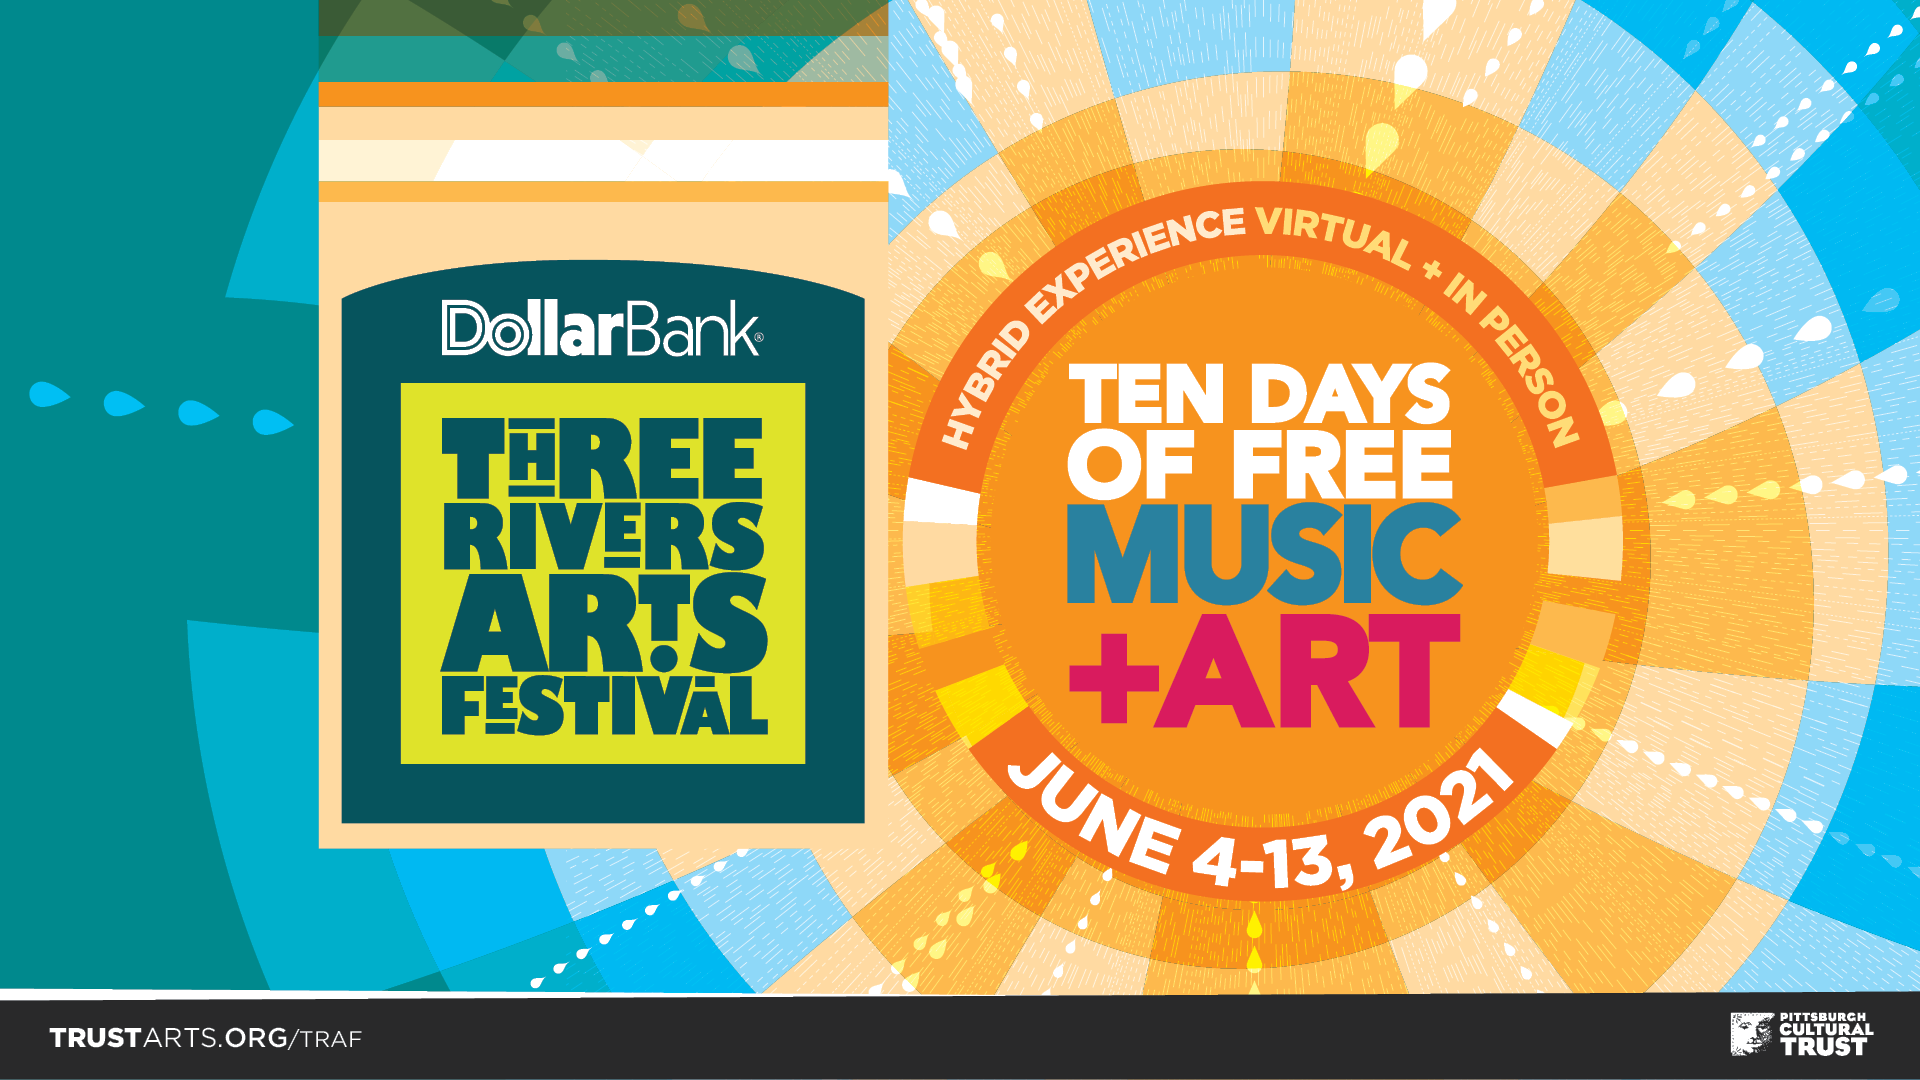 Colorful background with Dollar Bank Three Rivers Arts Festival logo on the left and text on the right that reads: Hybrid Experience, Virtual + In-Person, Ten Days of Free Music + Art, June 4-13, 2021